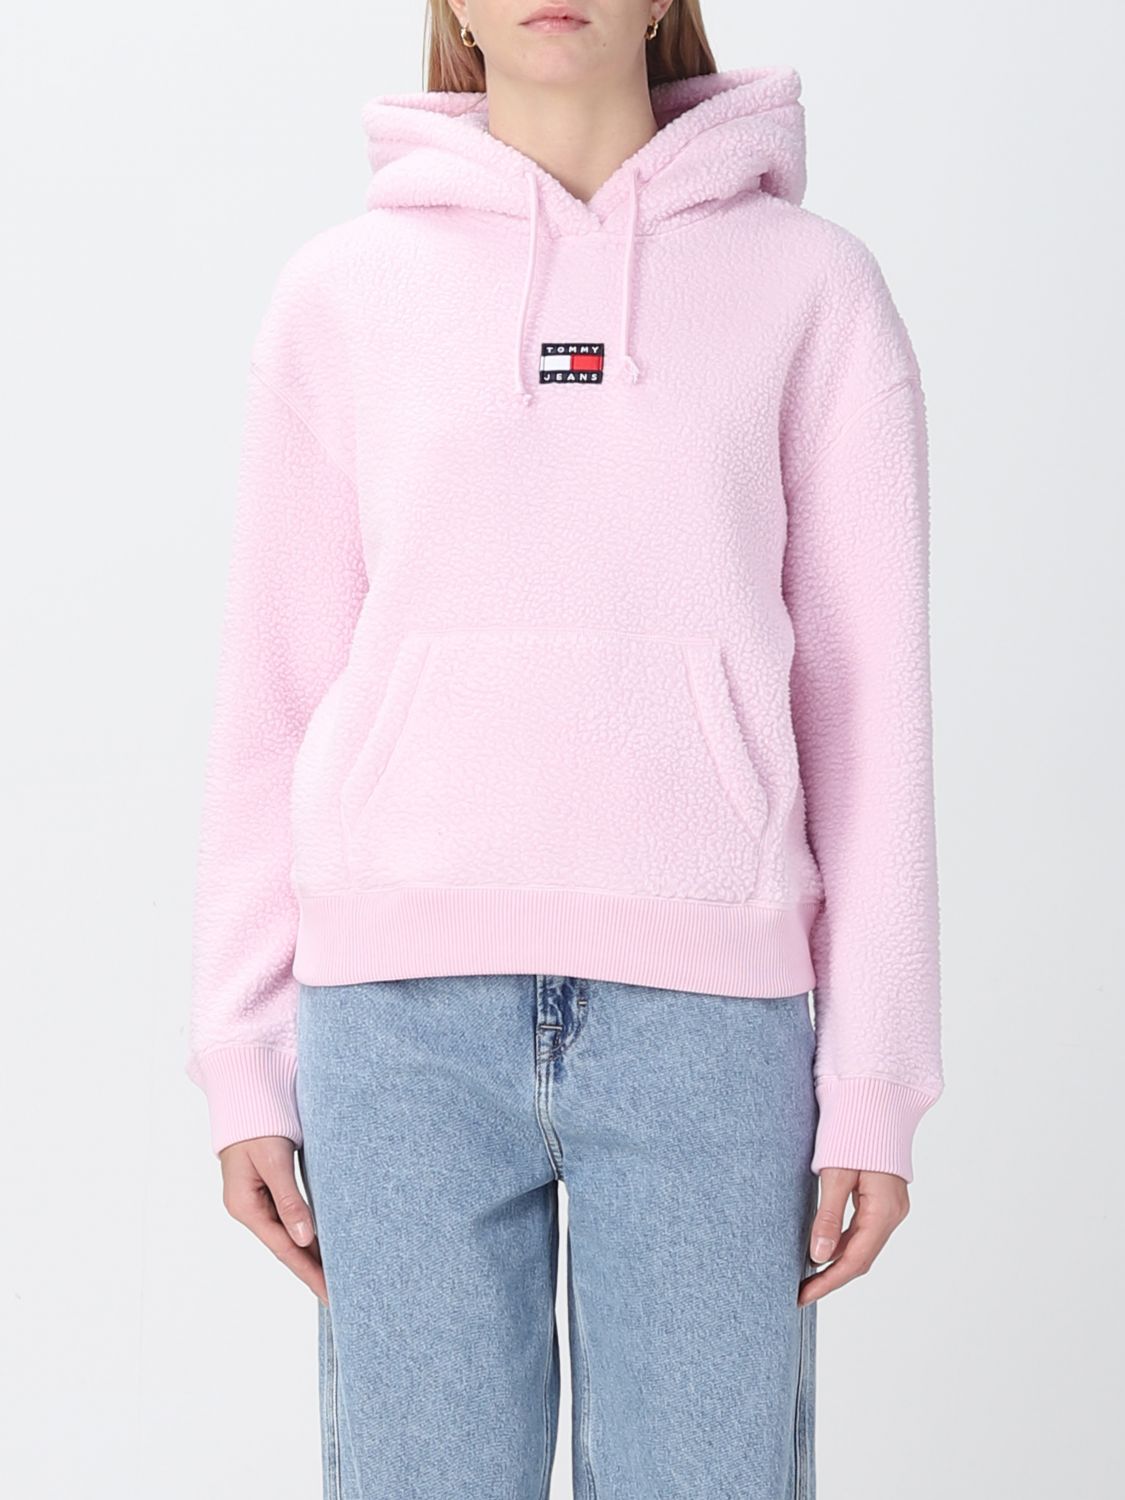 Tommy Jeans sweatshirt for - Pink | Tommy Jeans sweatshirt DW0DW14690 online GIGLIO.COM